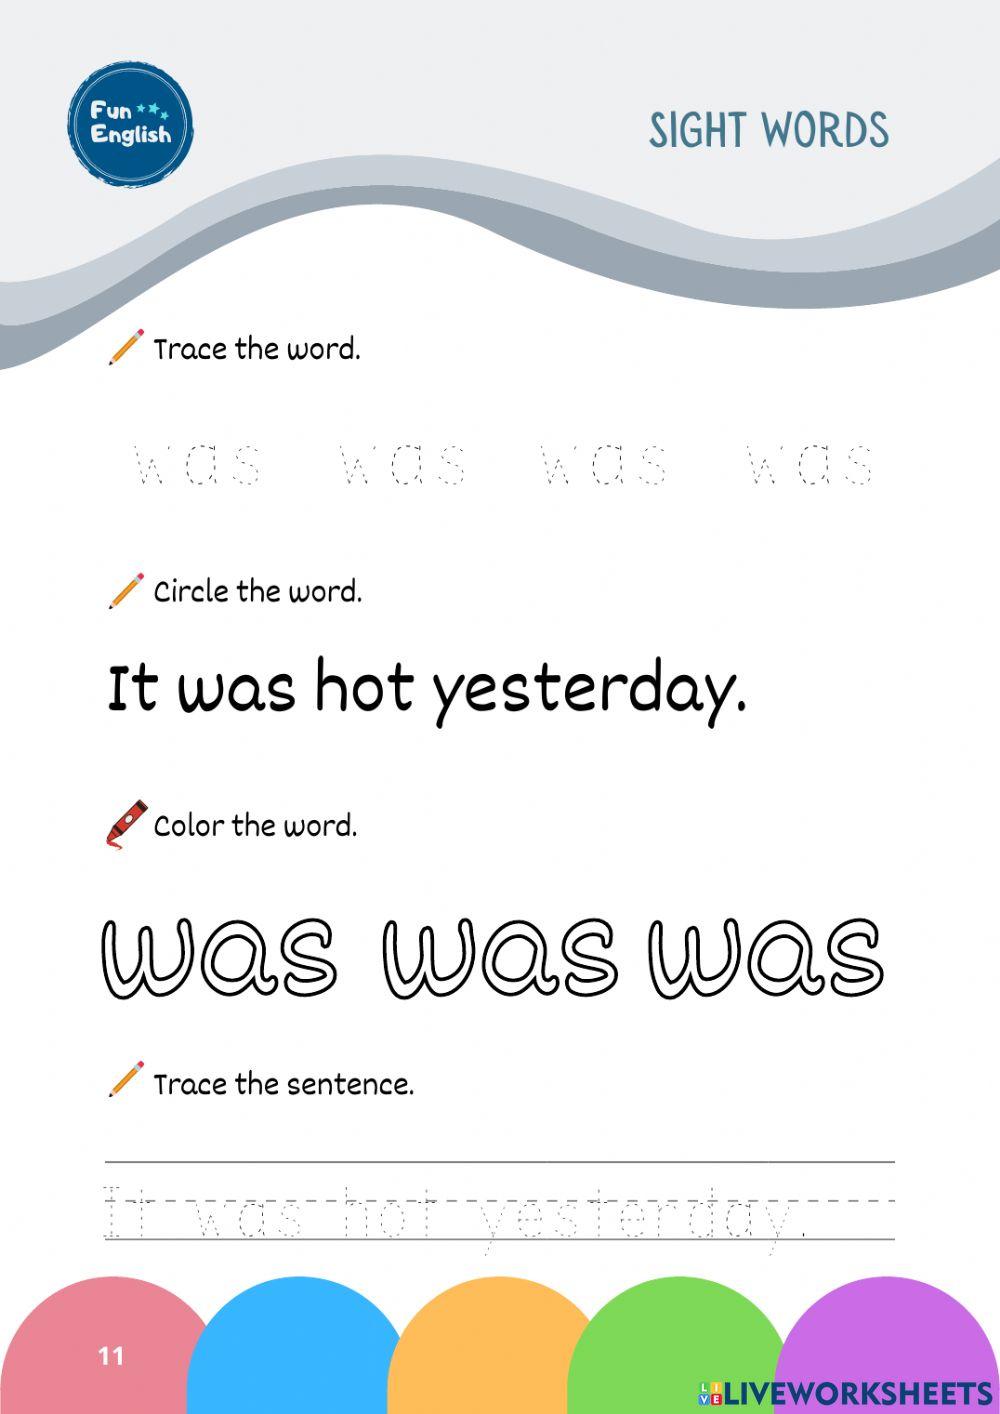 Sight Words: Was